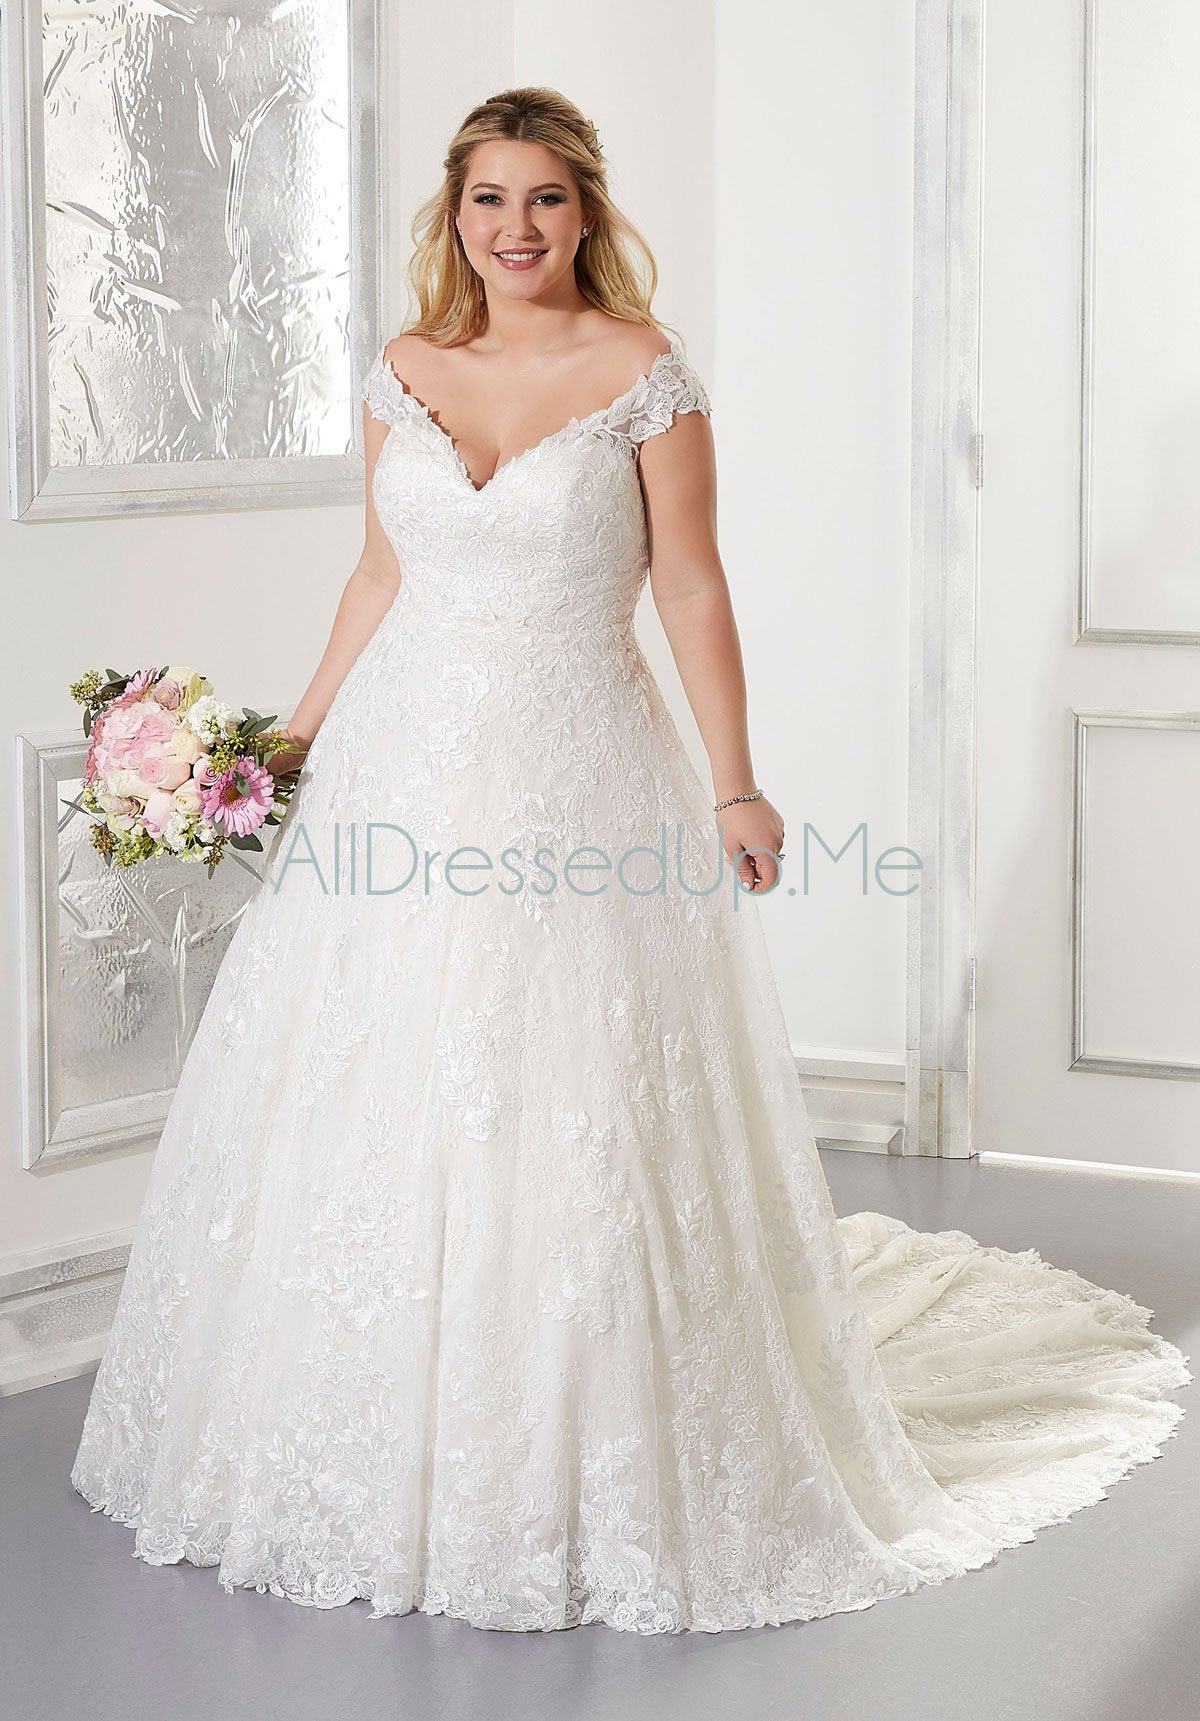 Julietta - Audrina - 3305 - Cheron's Bridal, Wedding Gown - Morilee - - Wedding Gowns Dresses Chattanooga Hixson Shops Boutiques Tennessee TN Georgia GA MSRP Lowest Prices Sale Discount